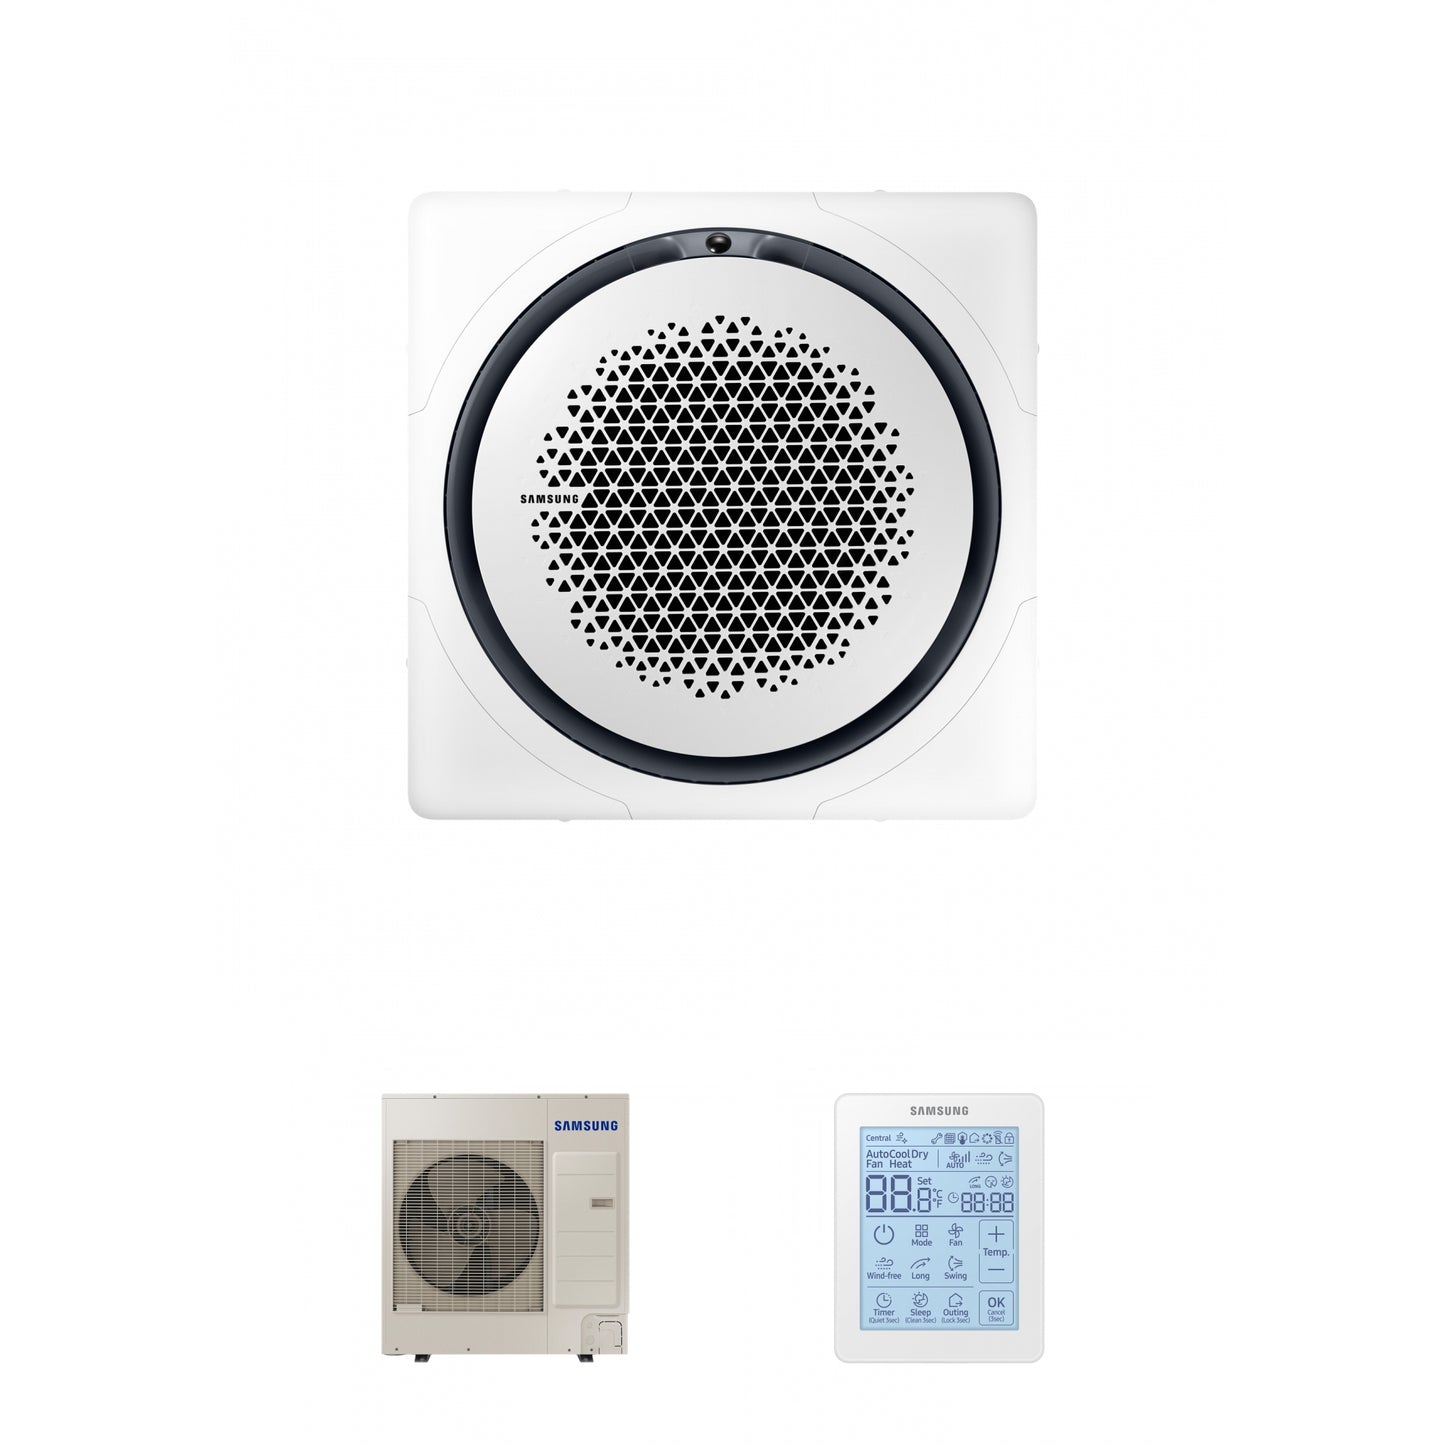 Samsung CAC 12kW 360 Cassette high efficiency with white square fascia panel with simplified wired controller